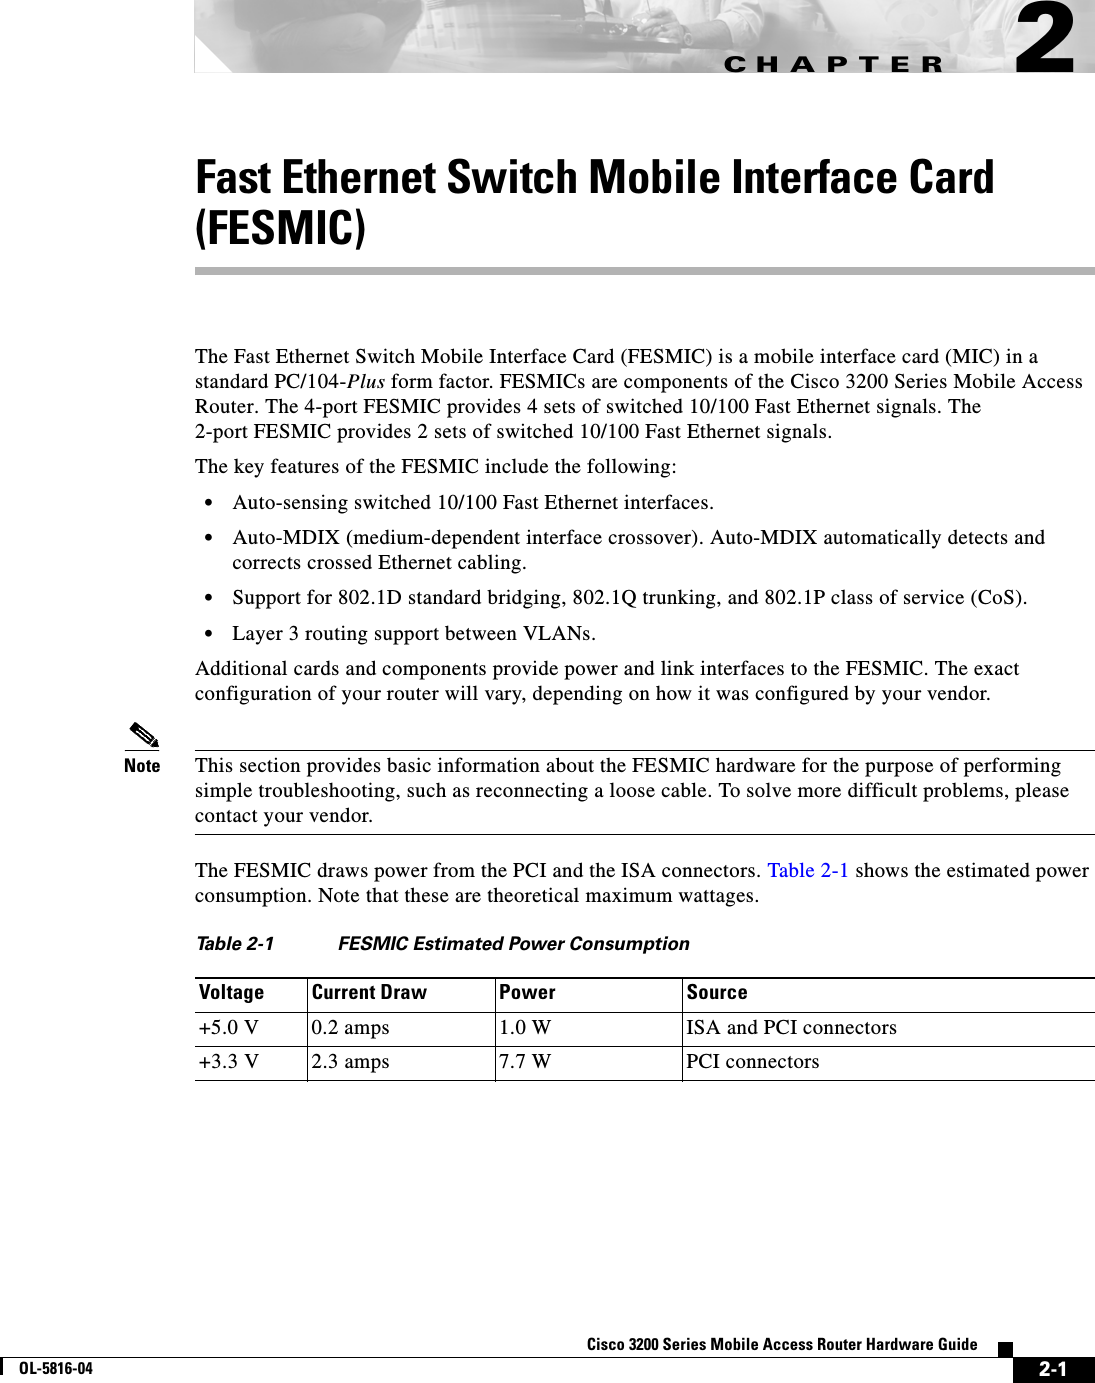 CHAPTER 2-1Cisco 3200 Series Mobile Access Router Hardware GuideOL-5816-042Fast Ethernet Switch Mobile Interface Card (FESMIC)The Fast Ethernet Switch Mobile Interface Card (FESMIC) is a mobile interface card (MIC) in a standard PC/104-Plus form factor. FESMICs are components of the Cisco 3200 Series Mobile Access Router. The 4-port FESMIC provides 4 sets of switched 10/100 Fast Ethernet signals. The 2-port FESMIC provides 2 sets of switched 10/100 Fast Ethernet signals. The key features of the FESMIC include the following:•Auto-sensing switched 10/100 Fast Ethernet interfaces.•Auto-MDIX (medium-dependent interface crossover). Auto-MDIX automatically detects and corrects crossed Ethernet cabling.•Support for 802.1D standard bridging, 802.1Q trunking, and 802.1P class of service (CoS).•Layer 3 routing support between VLANs.Additional cards and components provide power and link interfaces to the FESMIC. The exact configuration of your router will vary, depending on how it was configured by your vendor.Note This section provides basic information about the FESMIC hardware for the purpose of performing simple troubleshooting, such as reconnecting a loose cable. To solve more difficult problems, please contact your vendor.The FESMIC draws power from the PCI and the ISA connectors. Table 2-1 shows the estimated power consumption. Note that these are theoretical maximum wattages.Table 2-1 FESMIC Estimated Power ConsumptionVoltage Current Draw Power Source+5.0 V 0.2 amps 1.0 W ISA and PCI connectors+3.3 V 2.3 amps 7.7 W PCI connectors